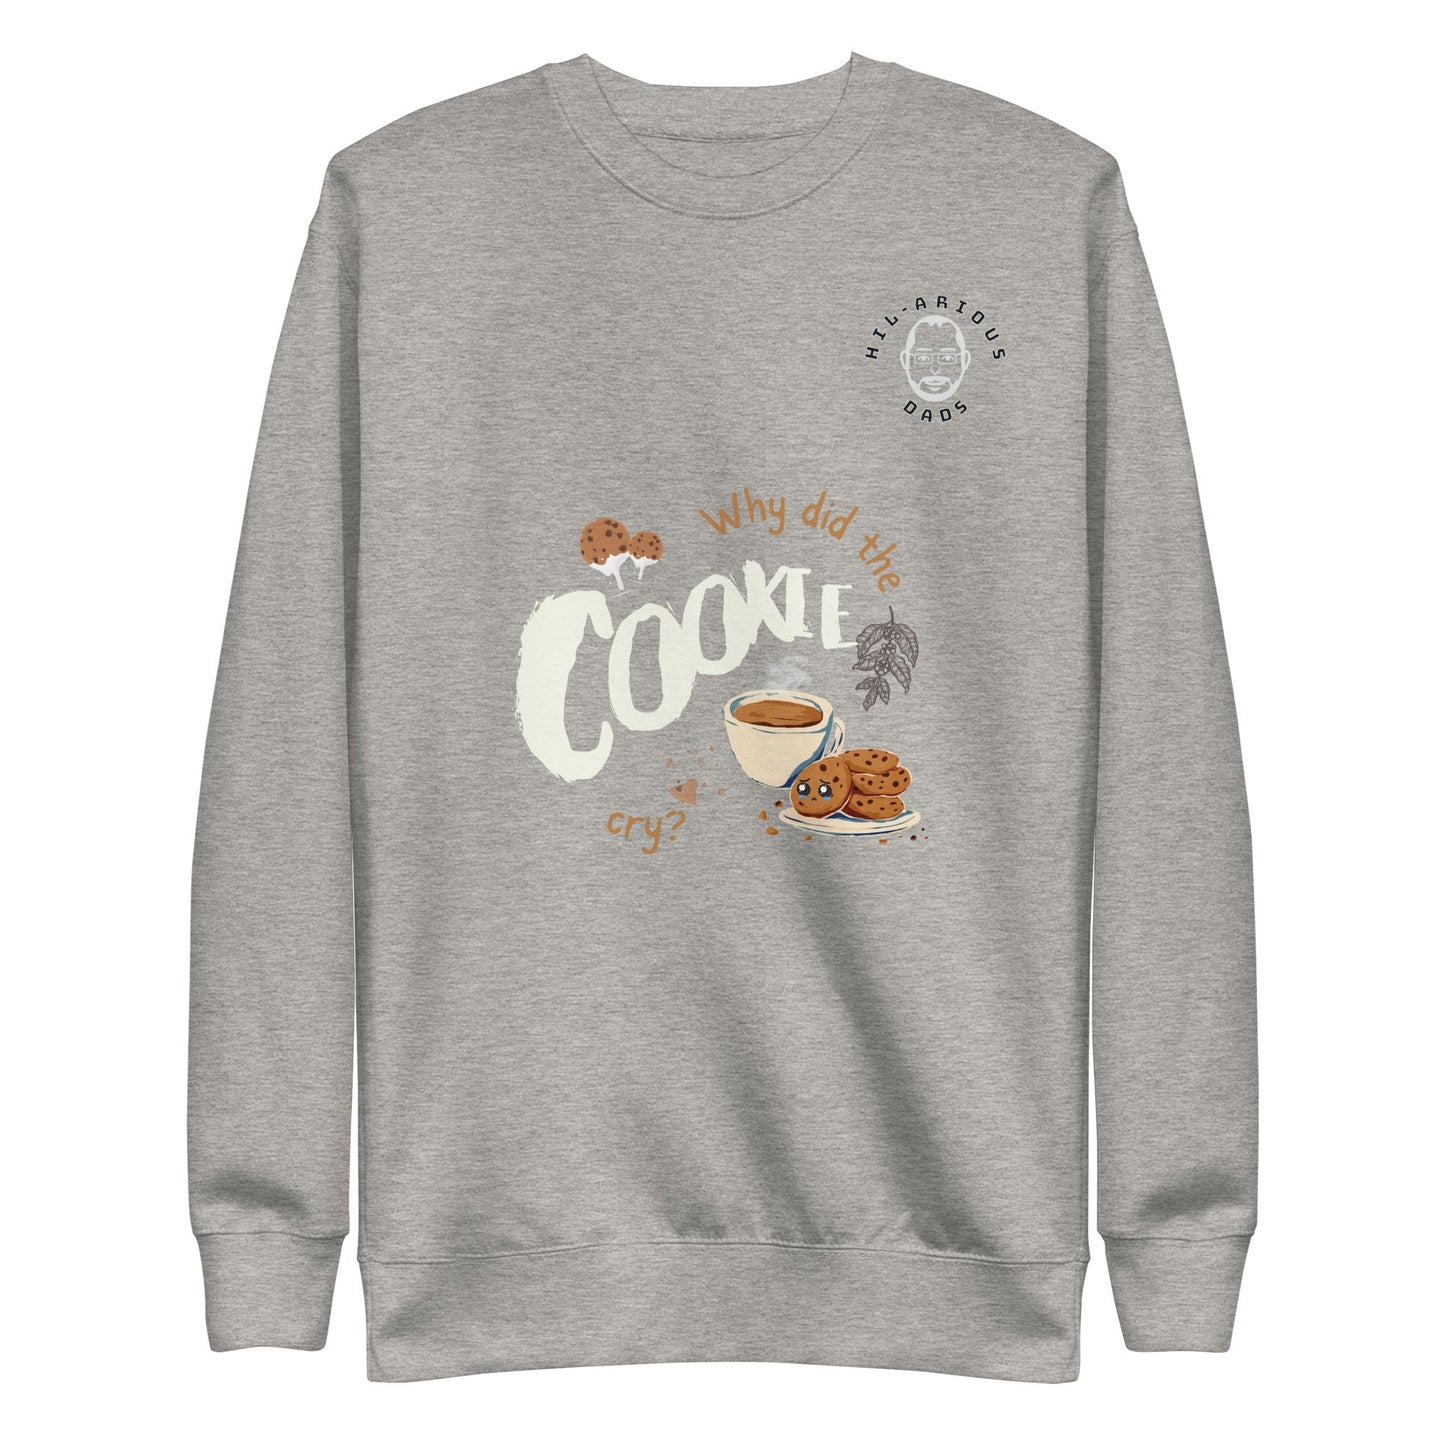 Why did the cookie cry?-Sweatshirt - Hil-arious Dads